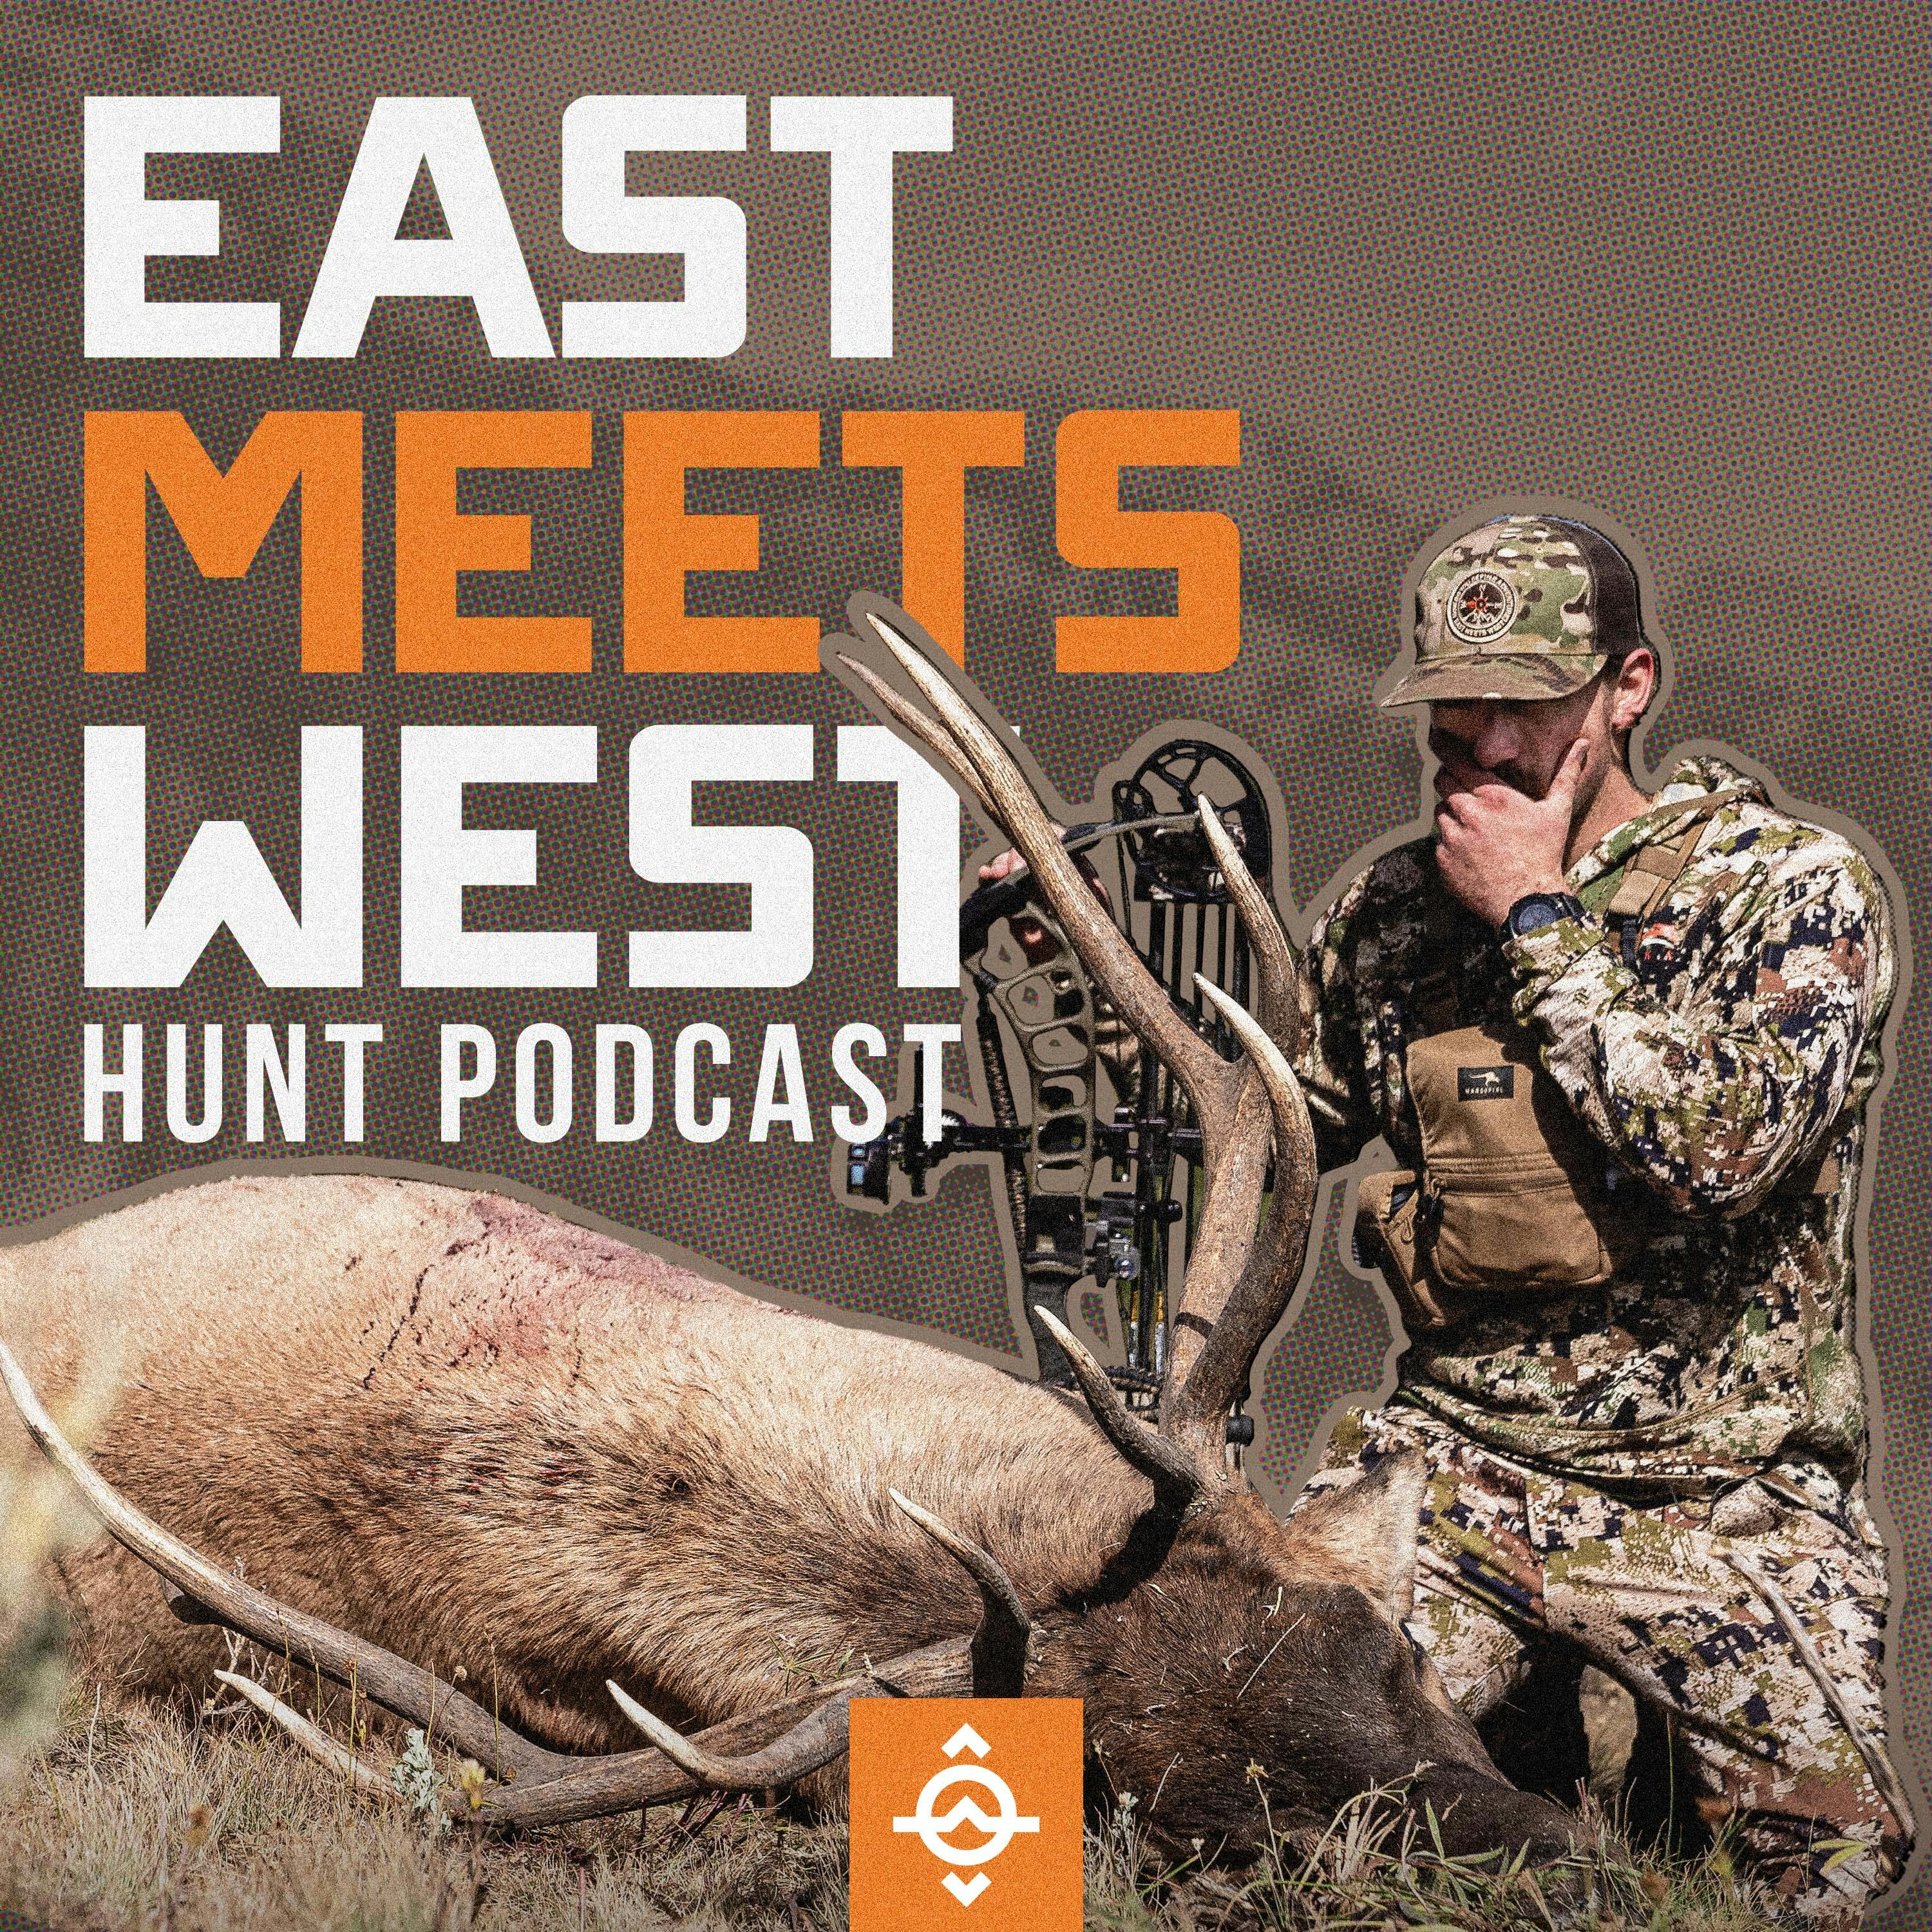 Ep. 312: Getting Your Bow, Arrows, and Hunt Plan Dialed For This Season - Pt 1 with James Yates